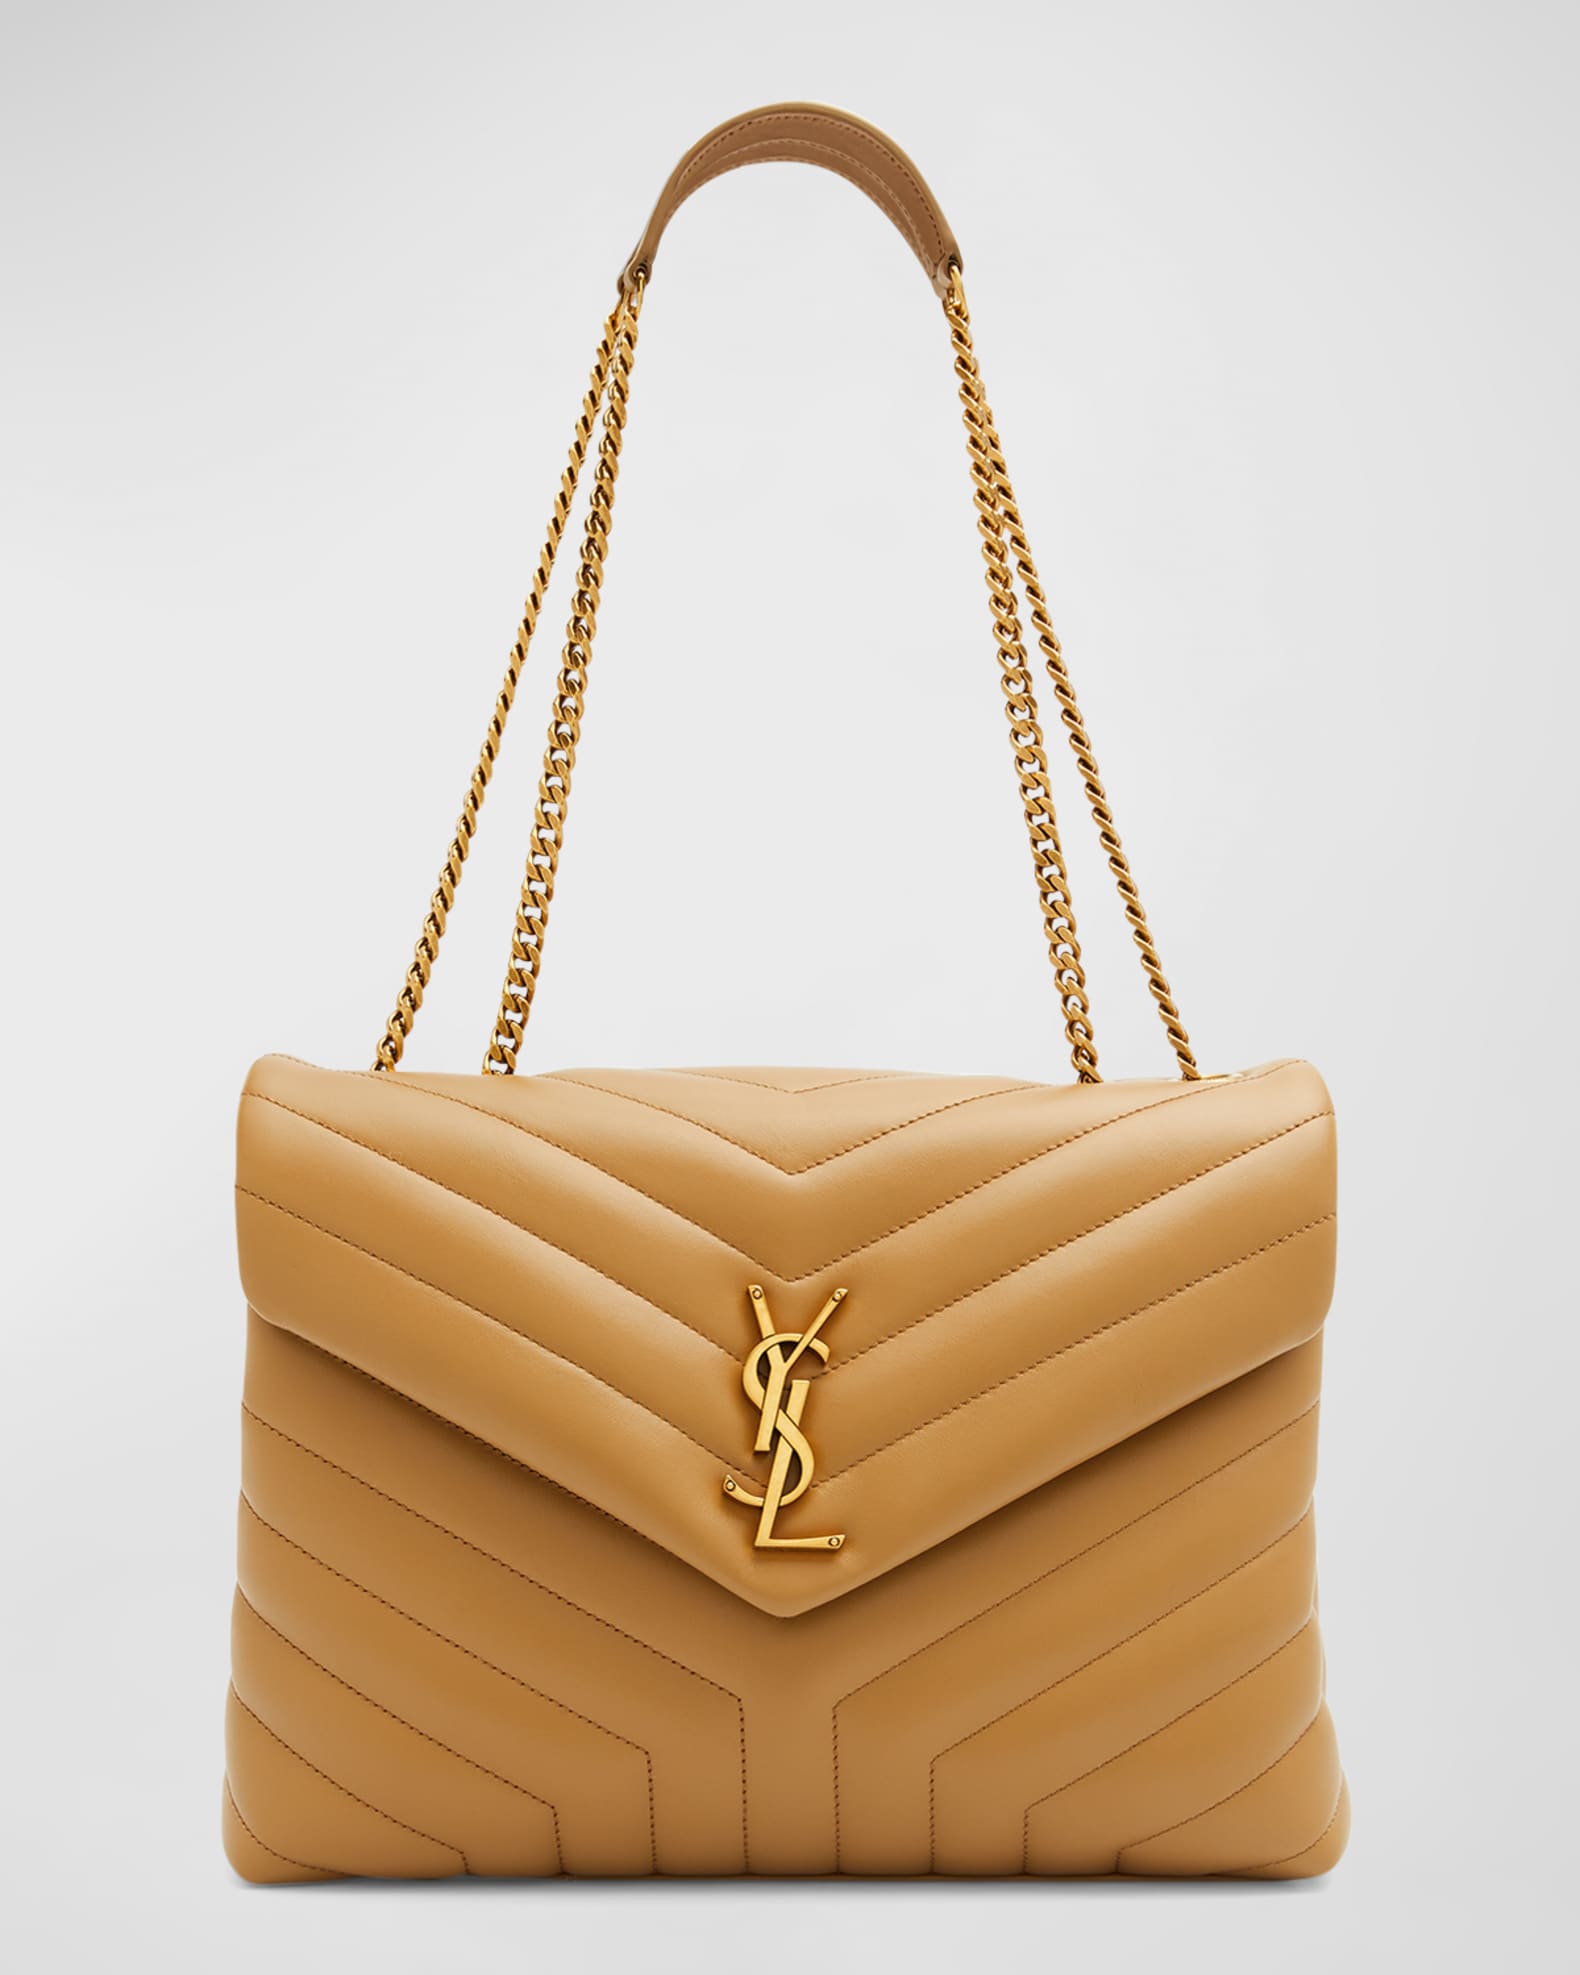 Saint Laurent Loulou Medium YSL Shoulder Bag in Quilted Leather | Neiman Marcus